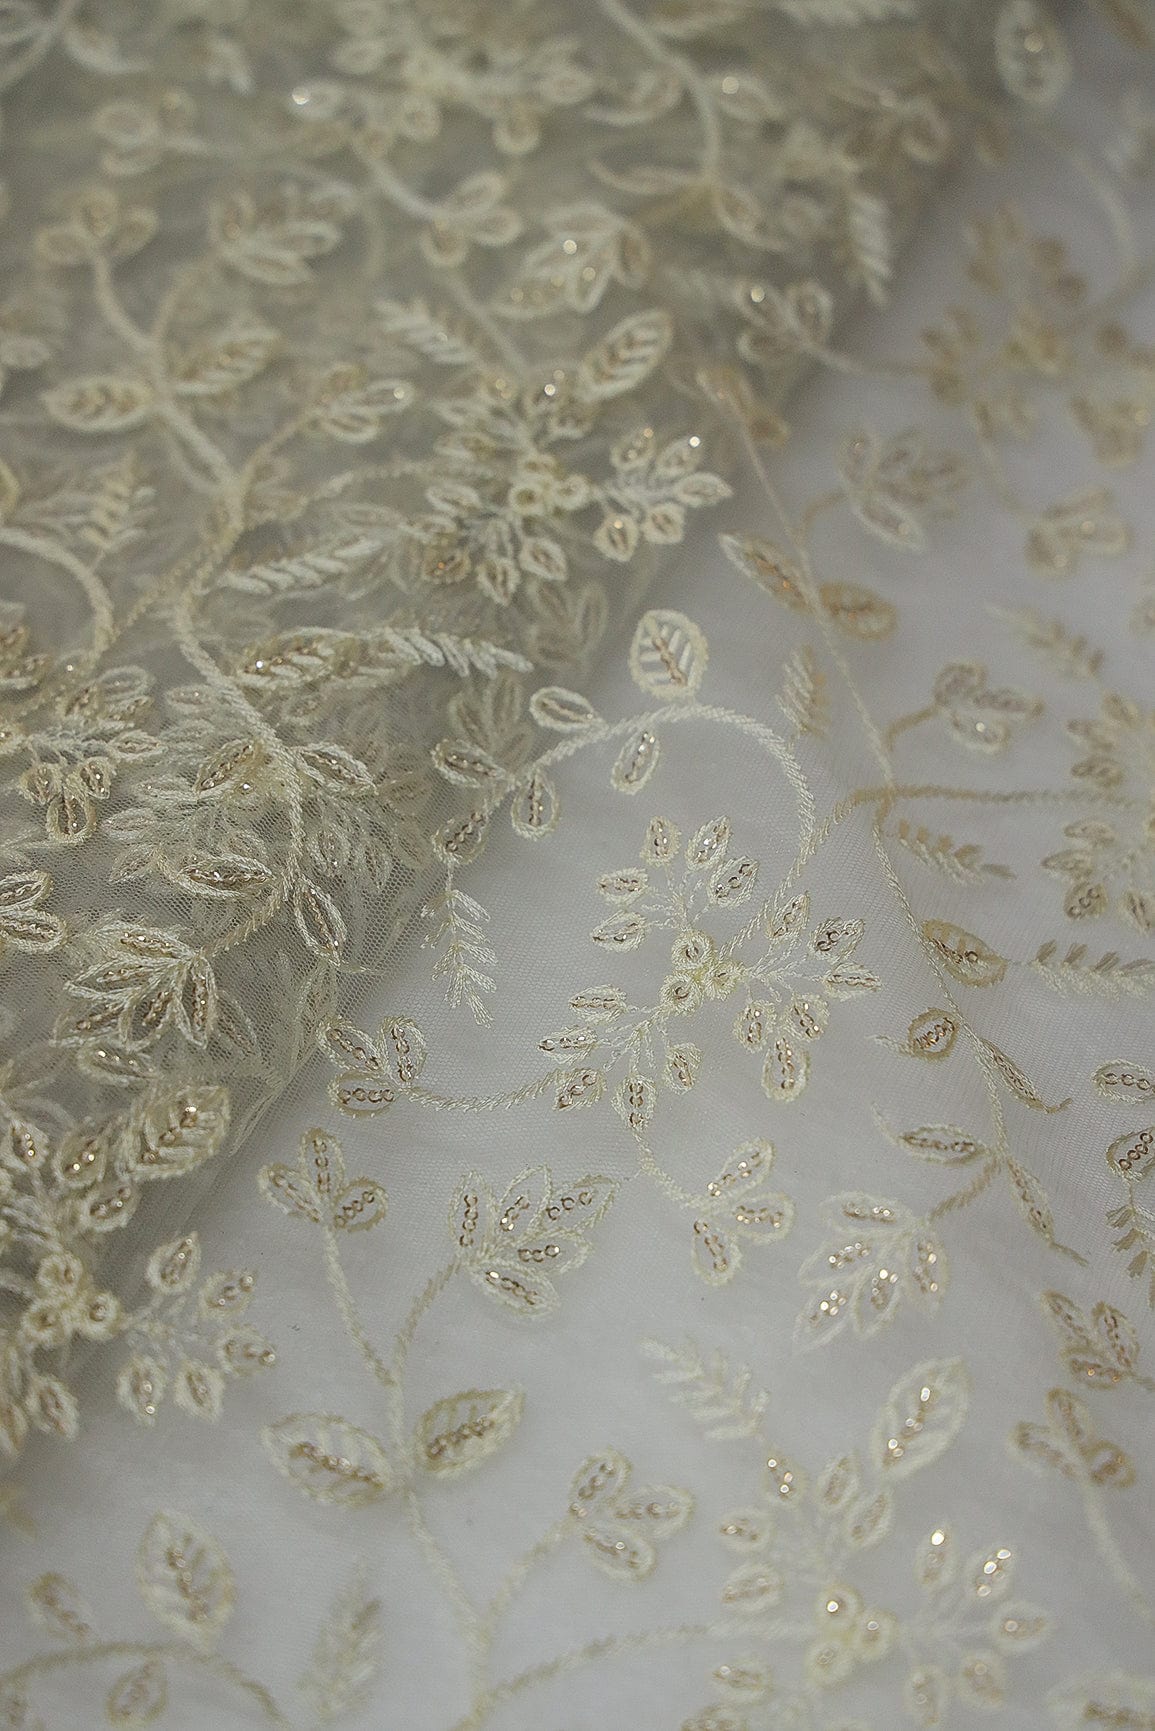 silk net fabric,net fabric for blouse,net fabric price,net fabric for dupatta,embroidered net fabric wholesale,golden embroidered net fabric,golden embroidery fabric